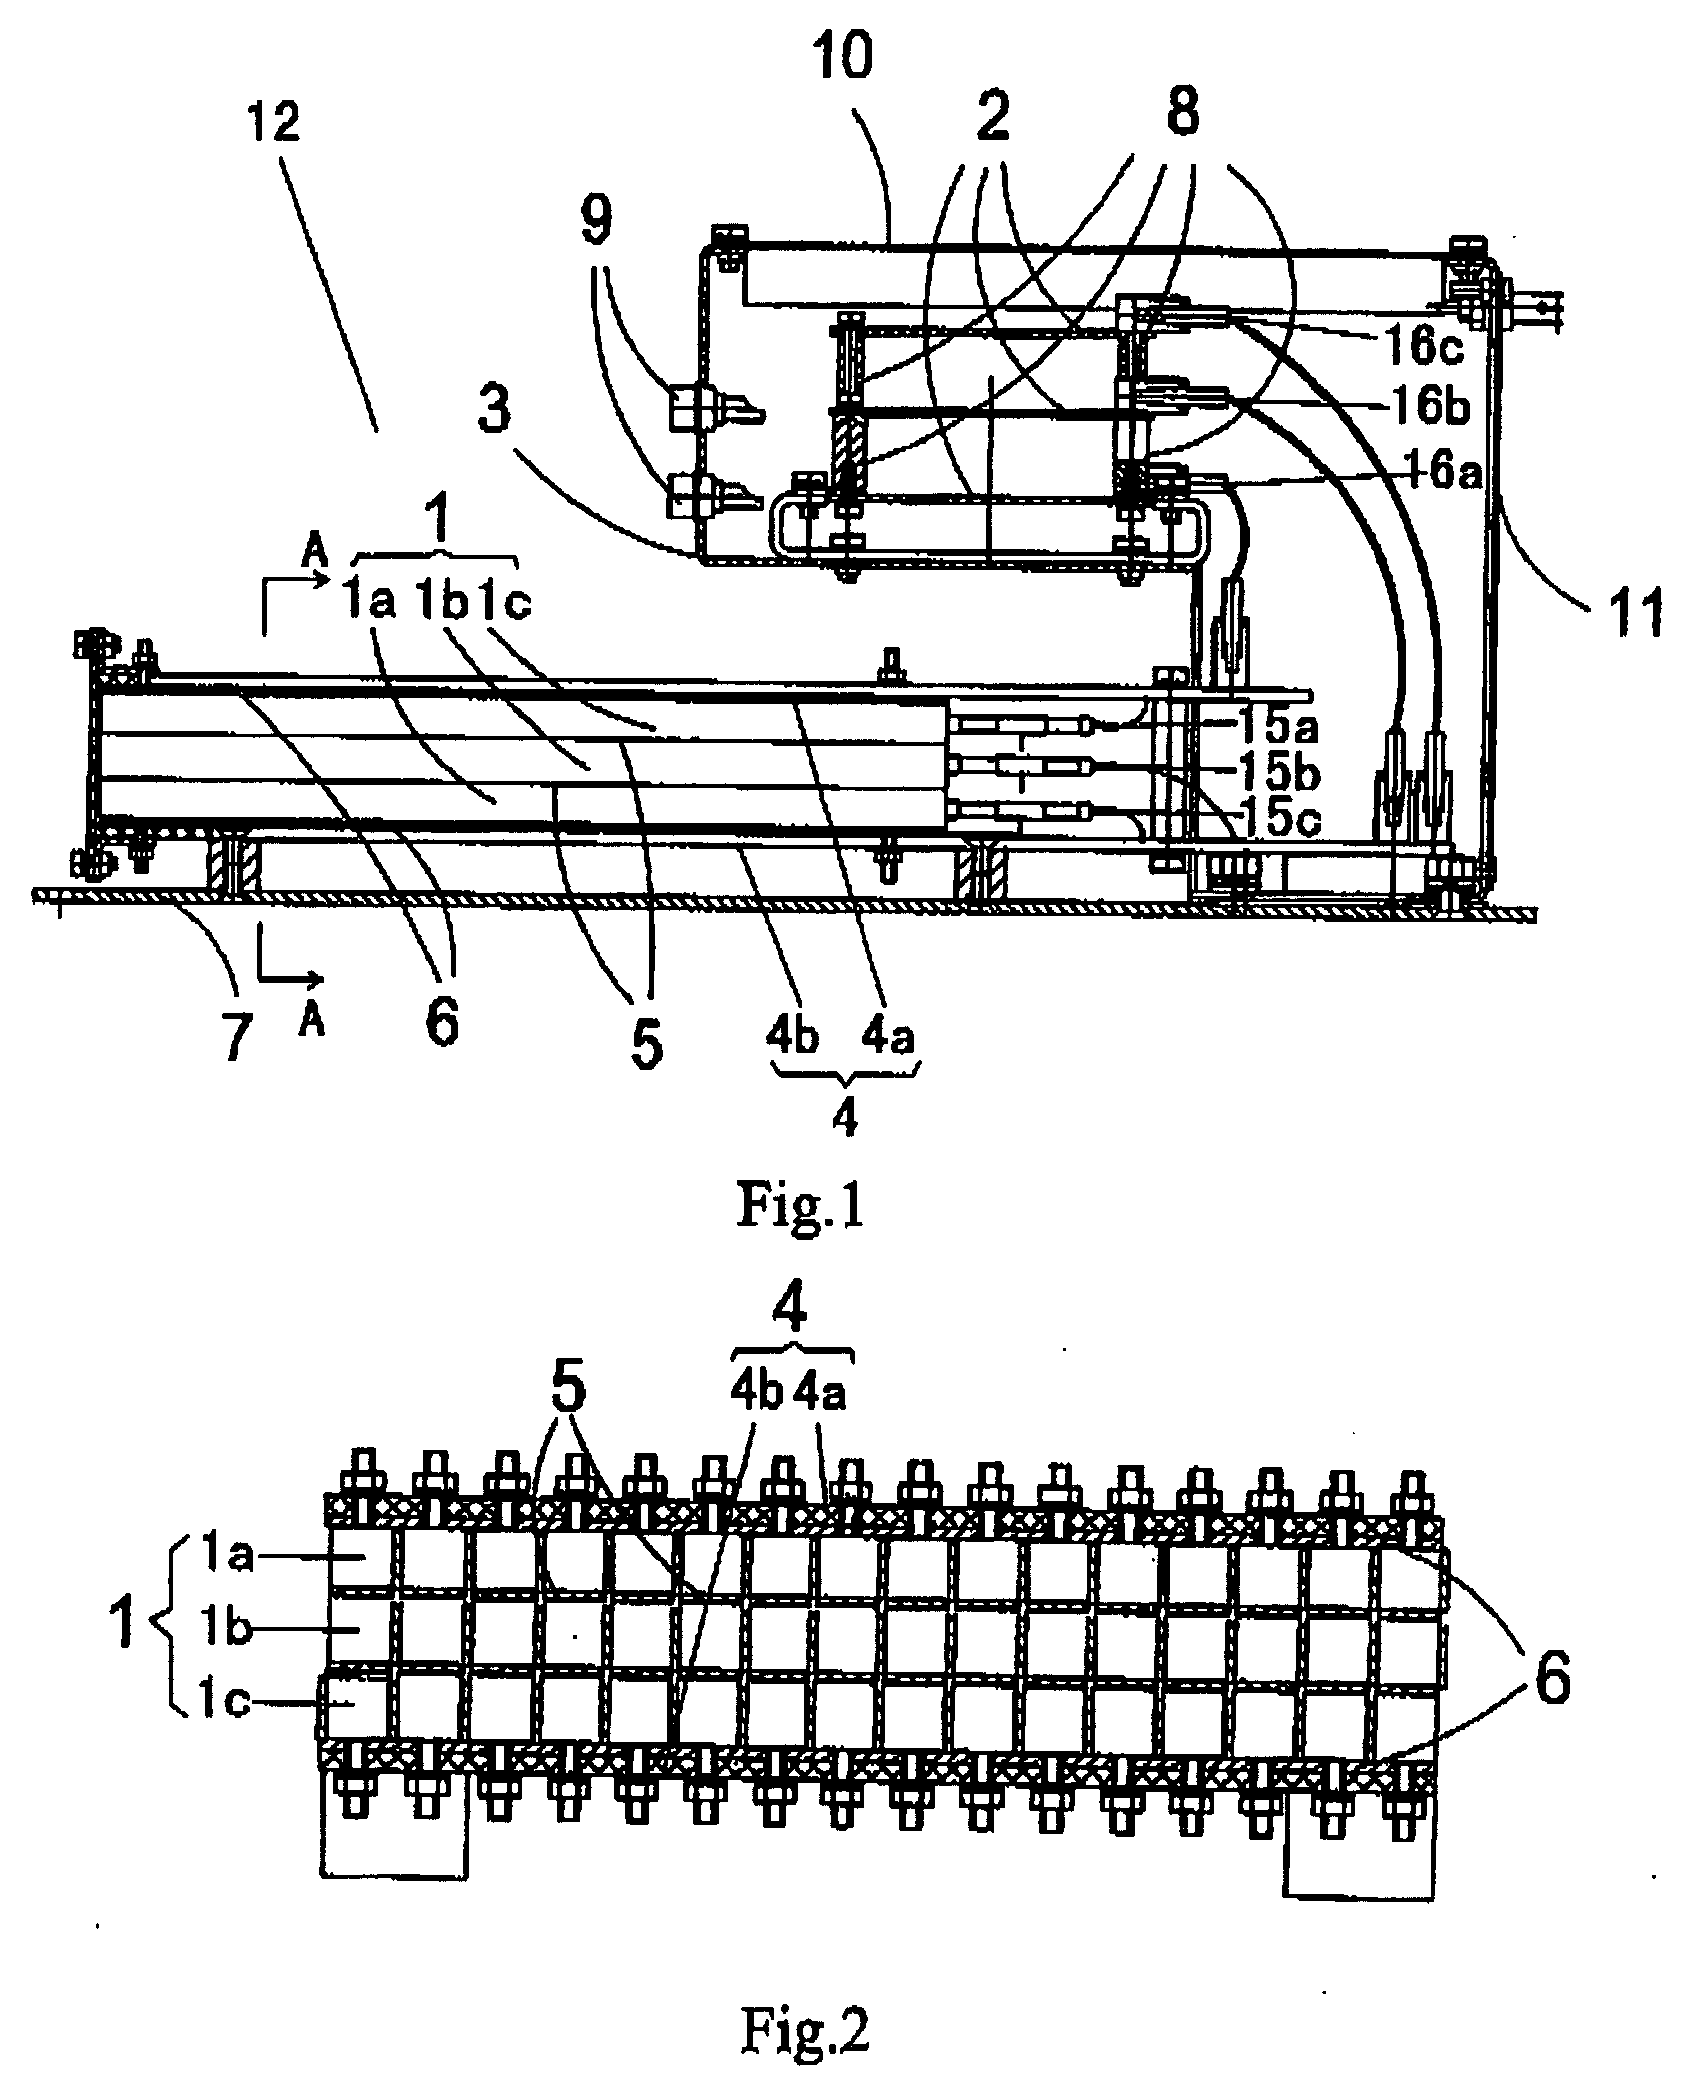 Multi-array detector module structure for radiation imaging